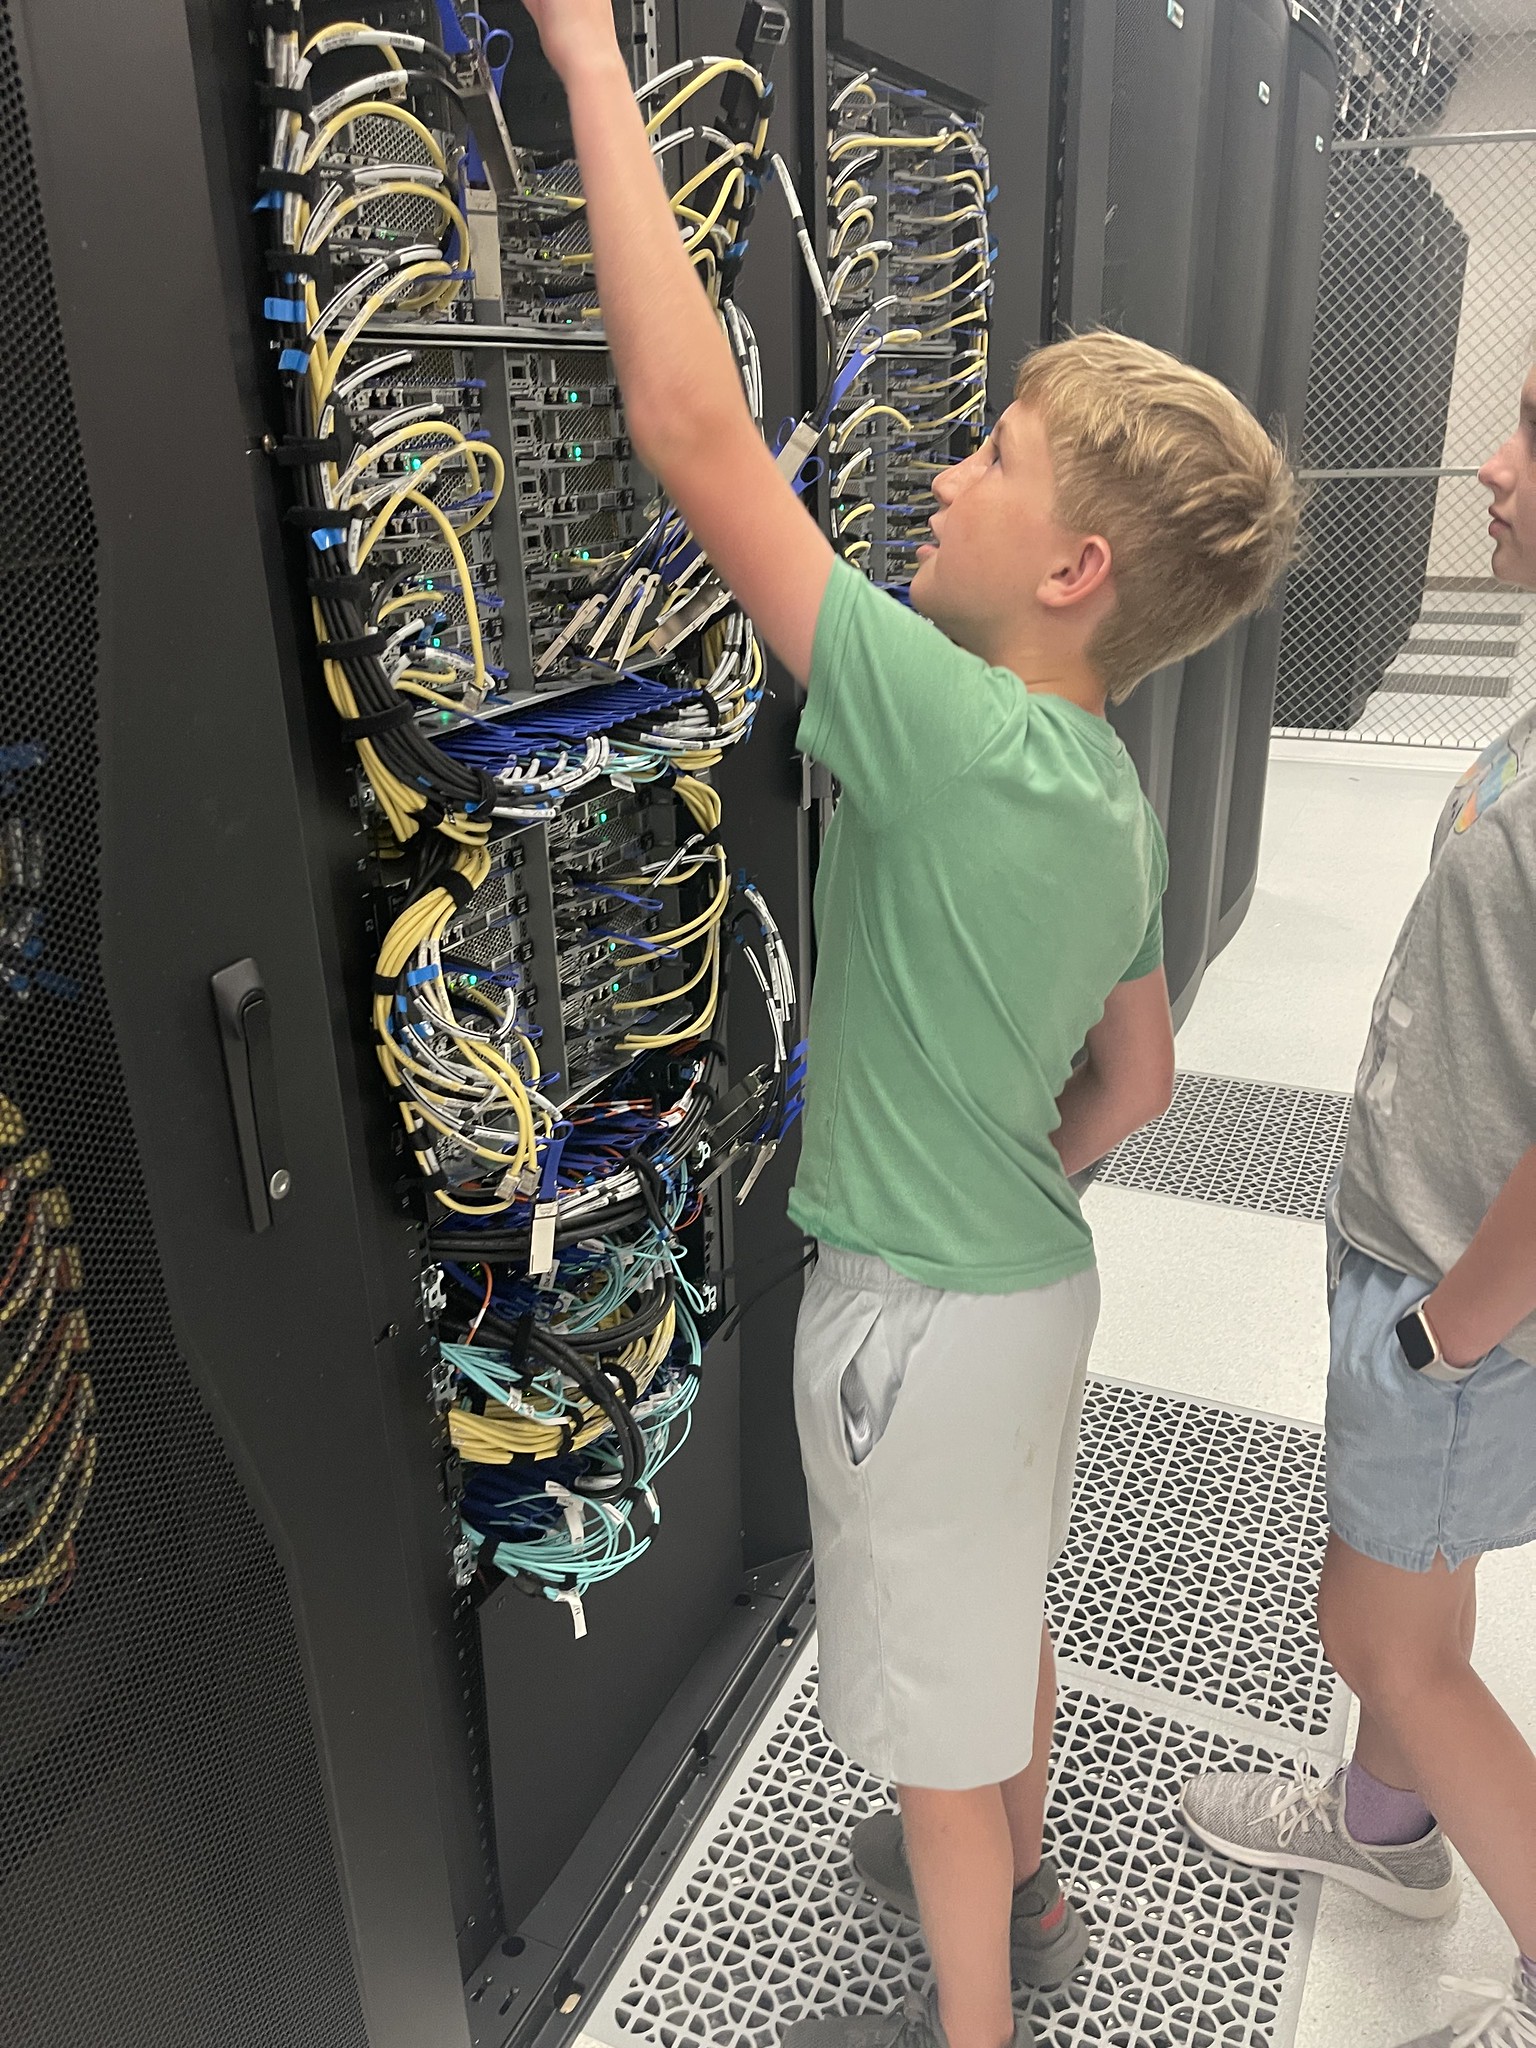 A camper visits the Easley supercomputer during the math week of camp.